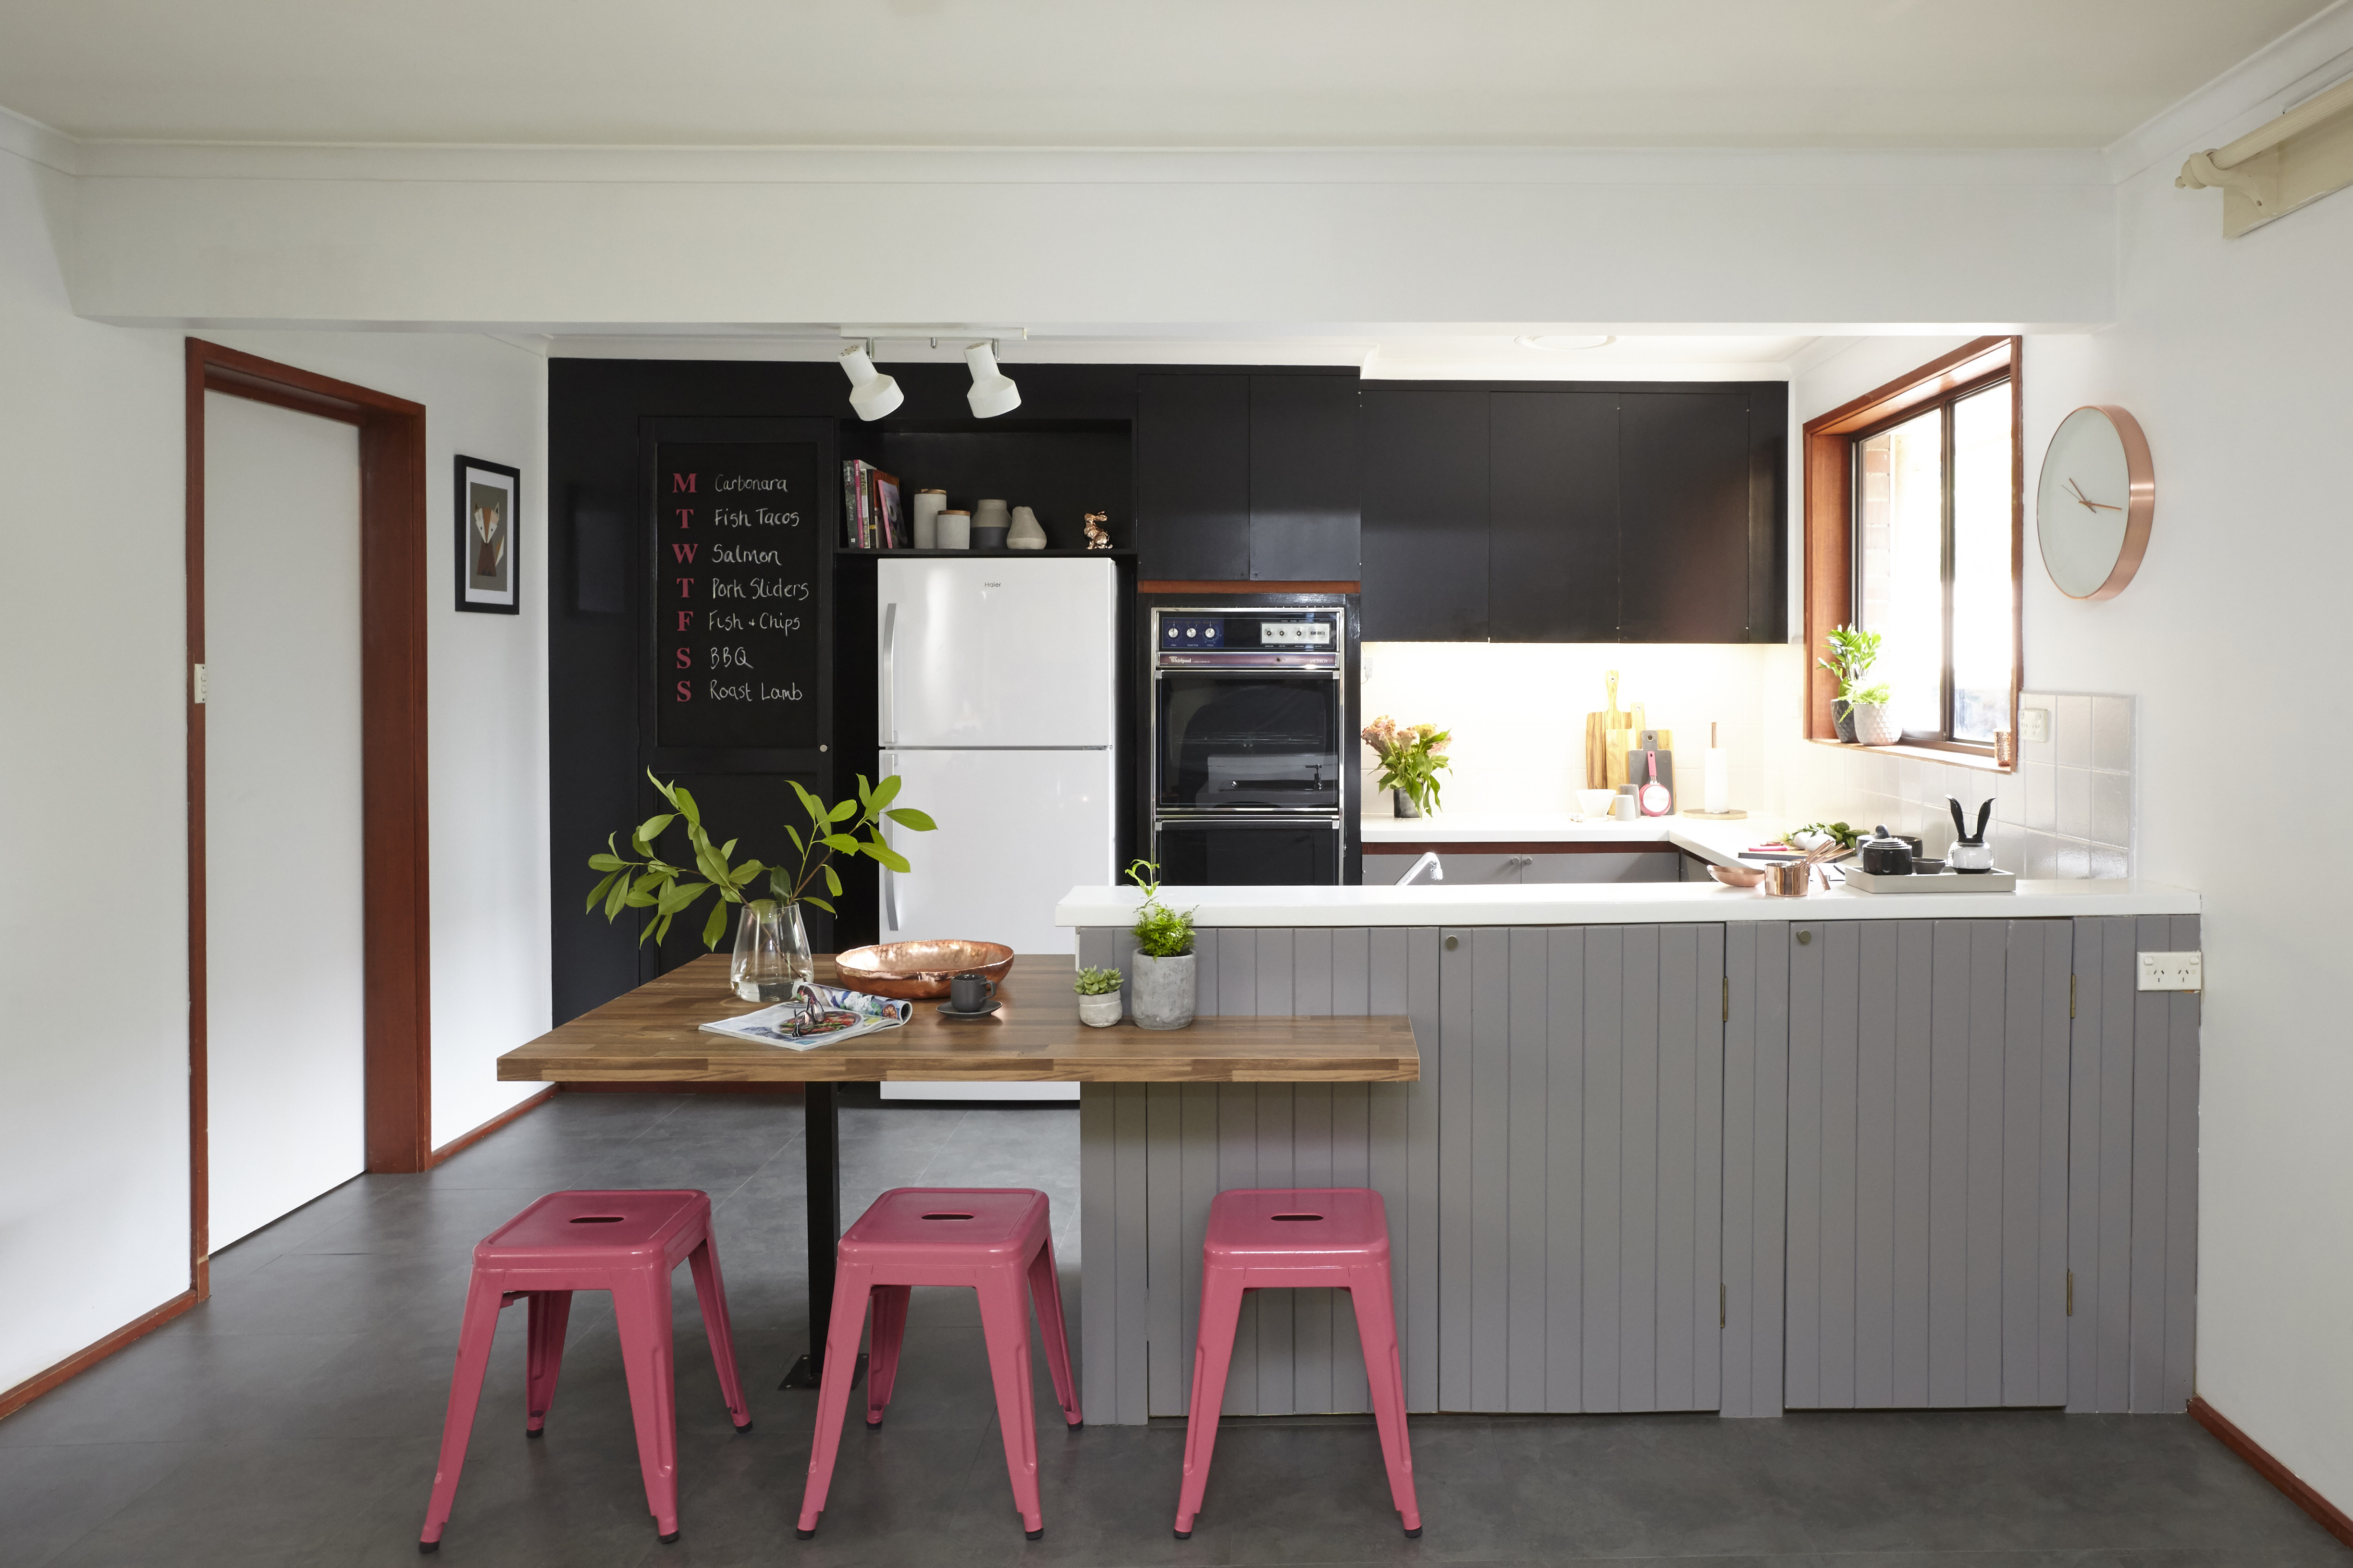 What would you do with this 70s kitchen? | Bunnings Workshop Community